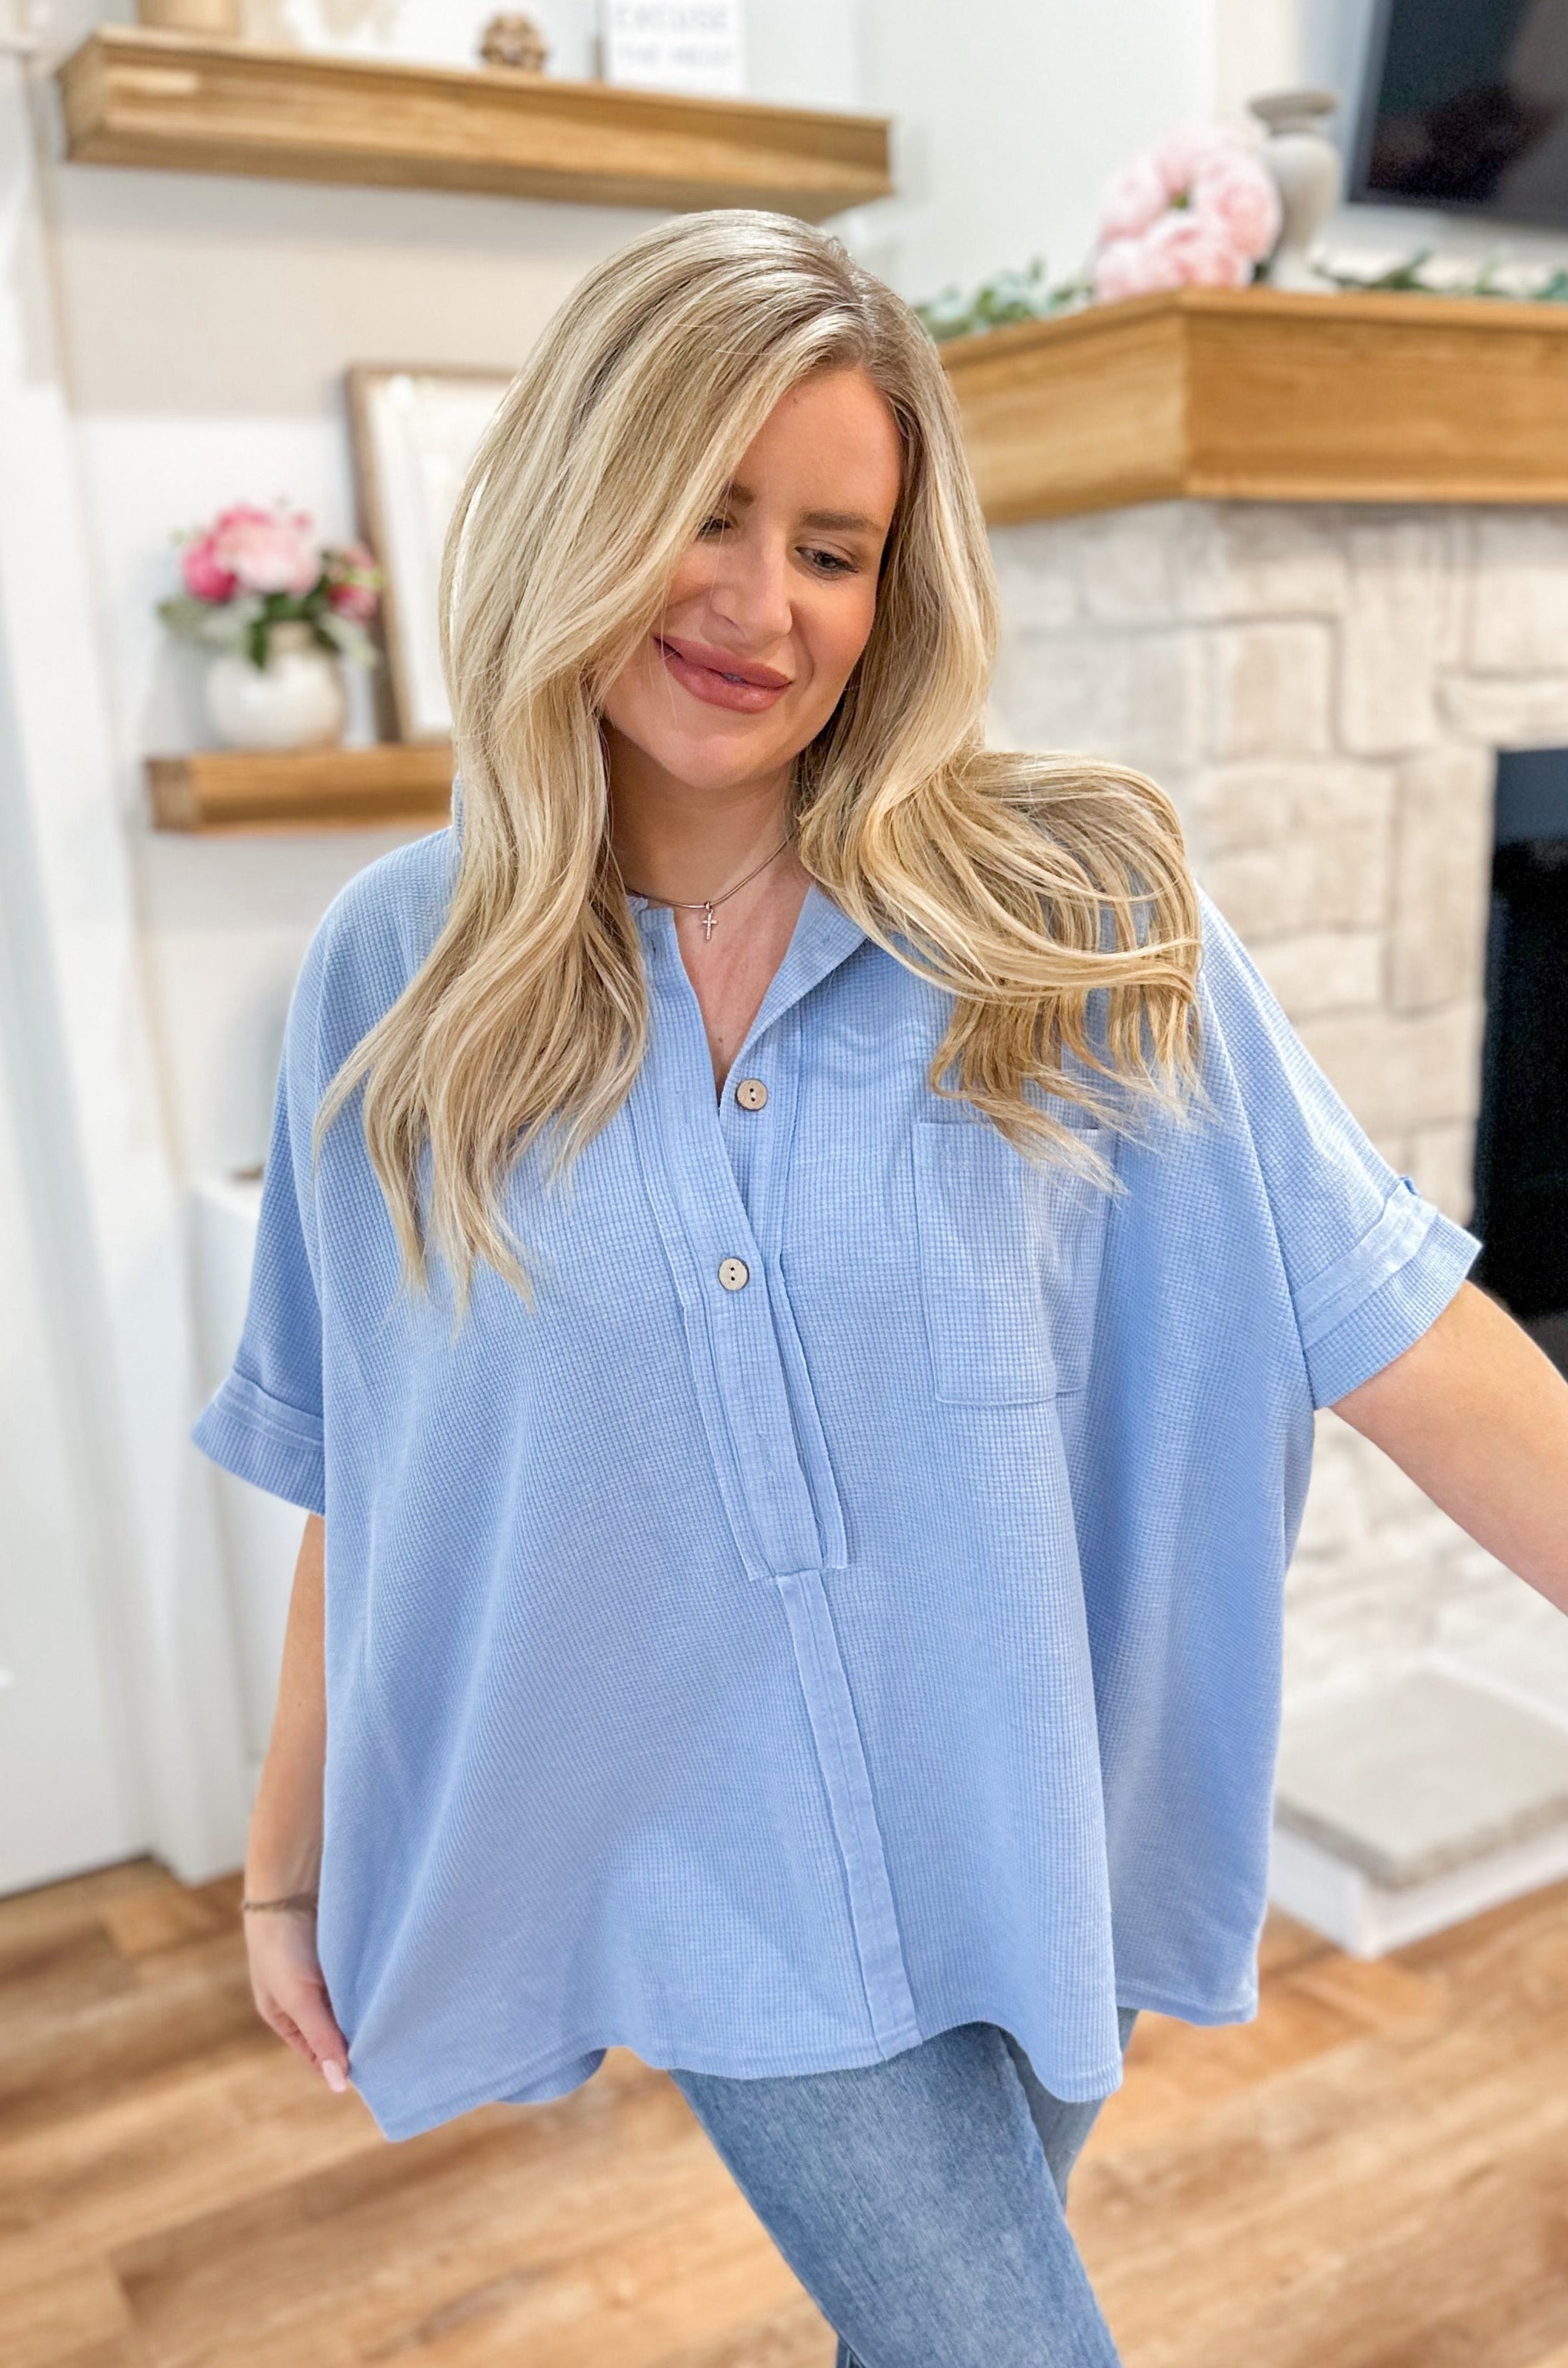 Kimberly Oversized Boxy Cut Button Down Top - Be You Boutique